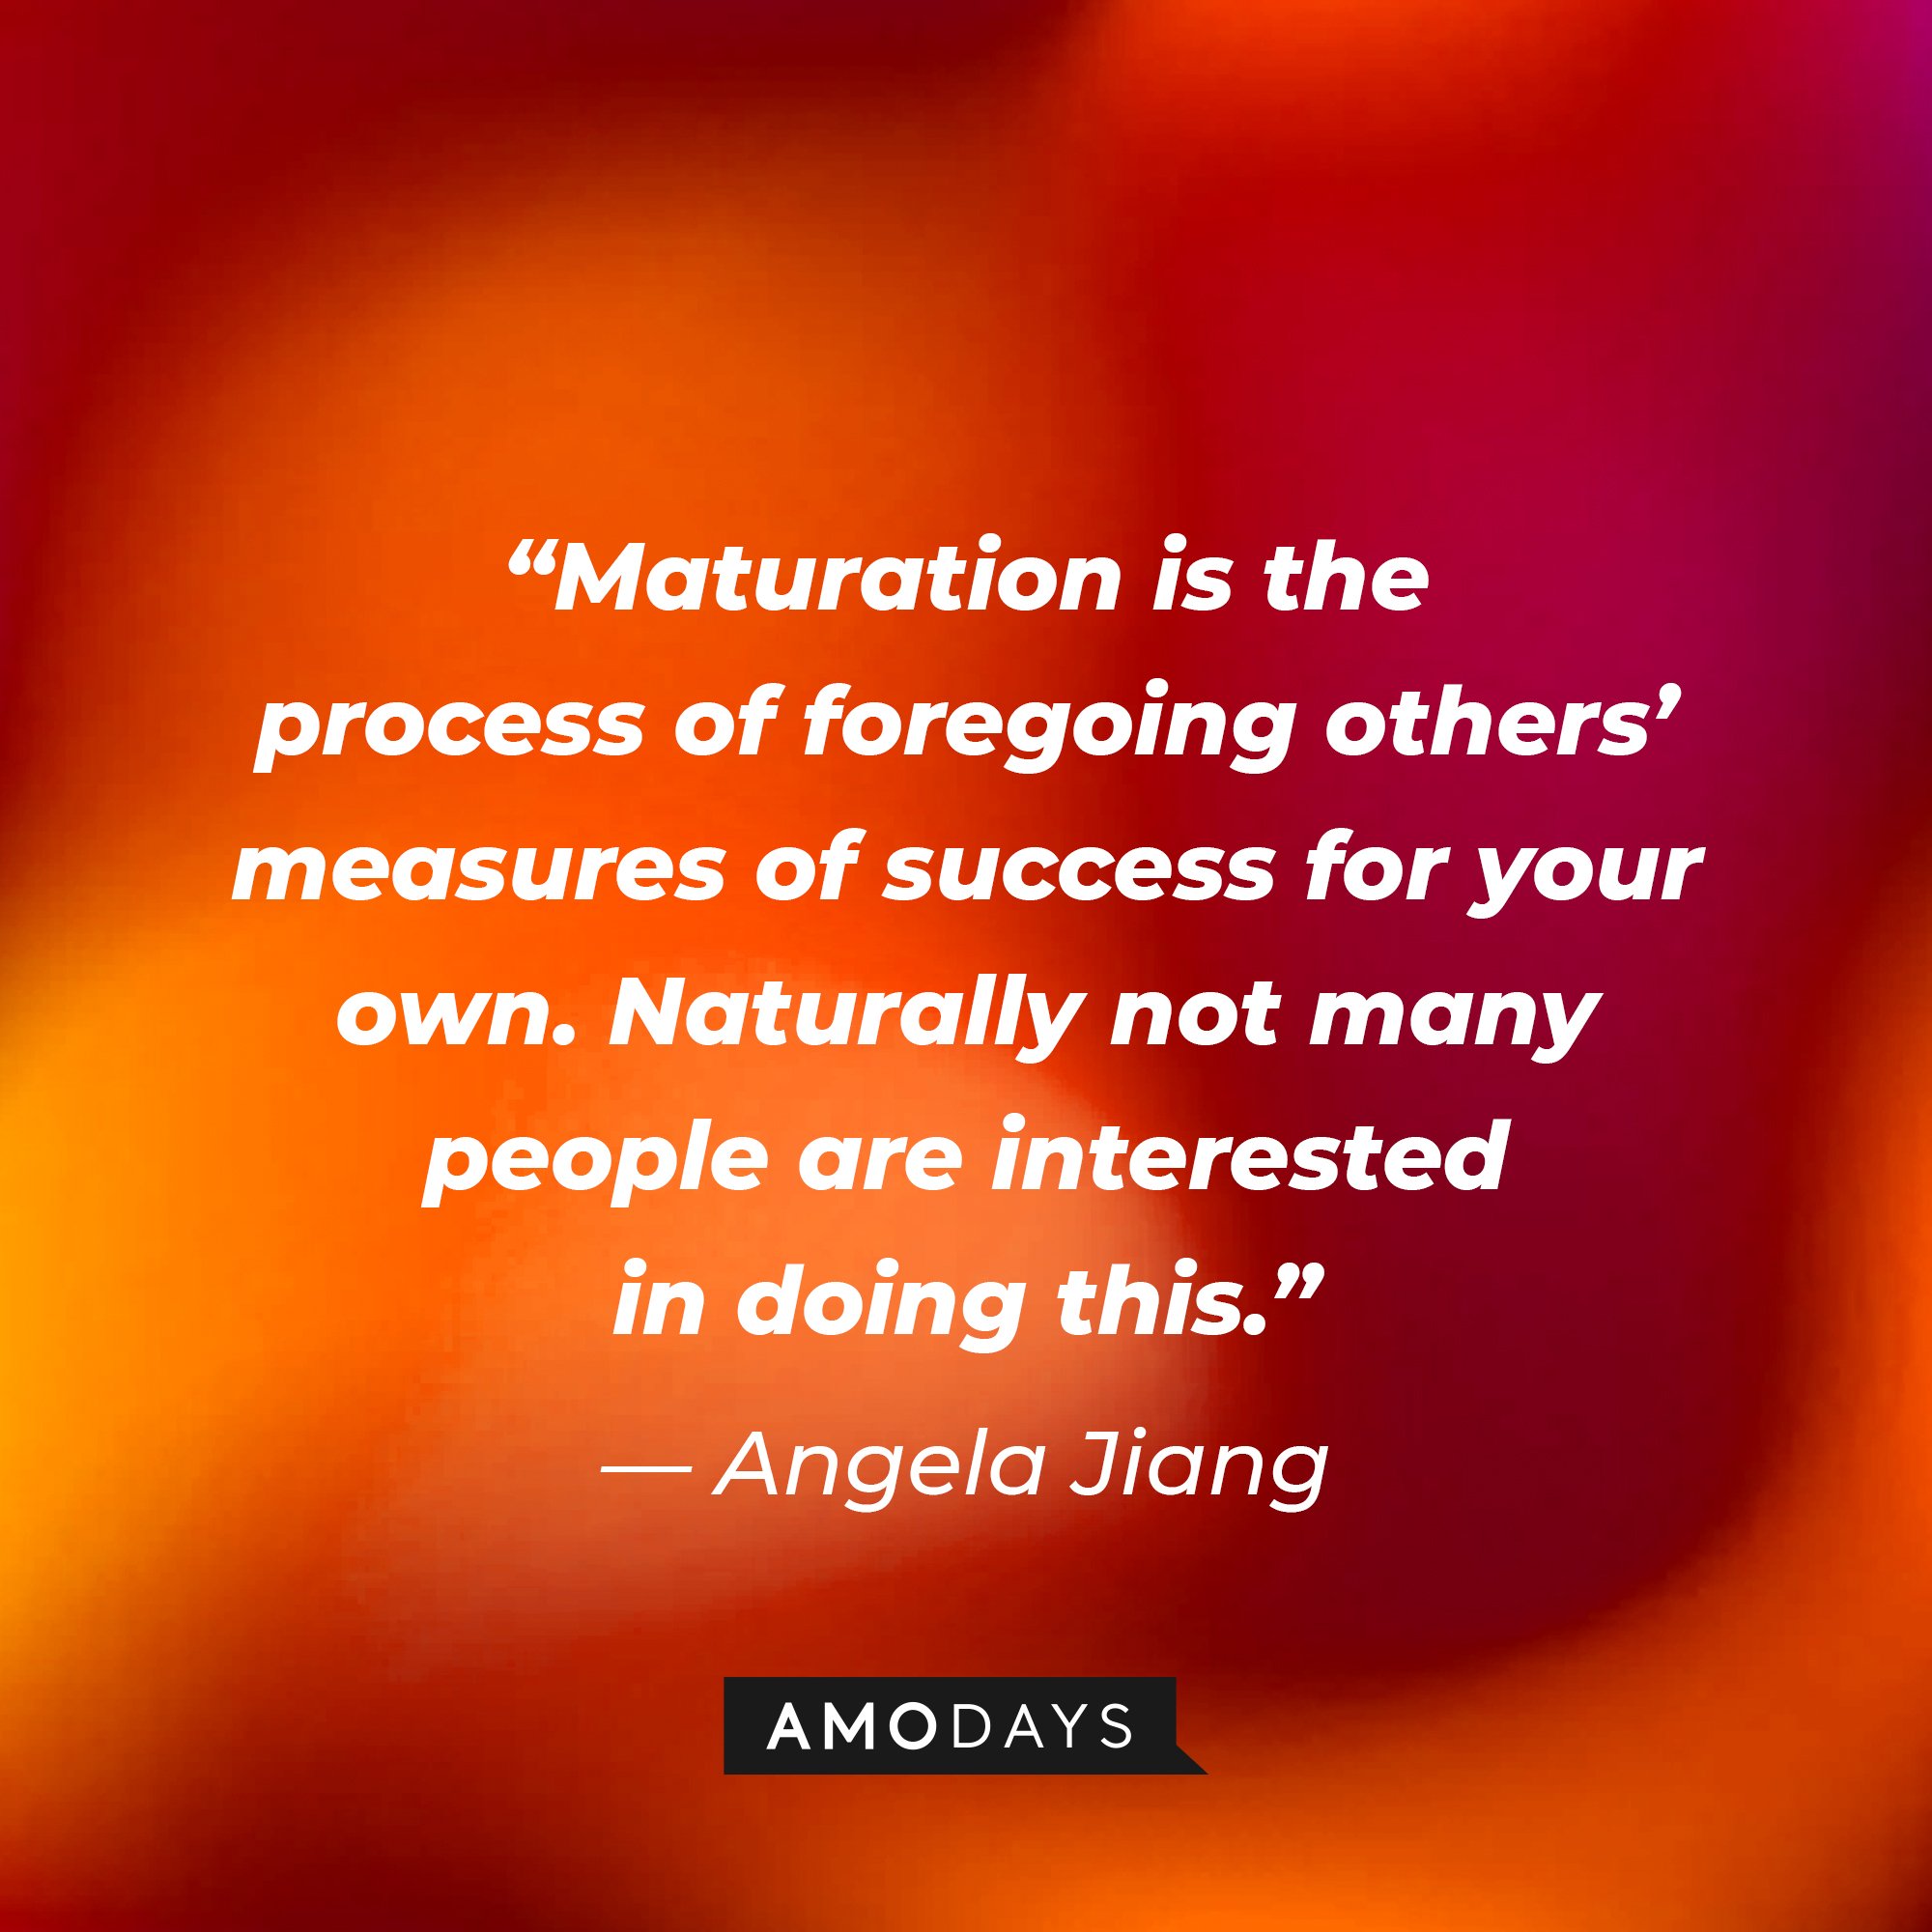 Angela Jiang's quote: “Maturation is the process of foregoing others’ measures of success for your own. Naturally not many people are interested in doing this.” | Image: AmoDays